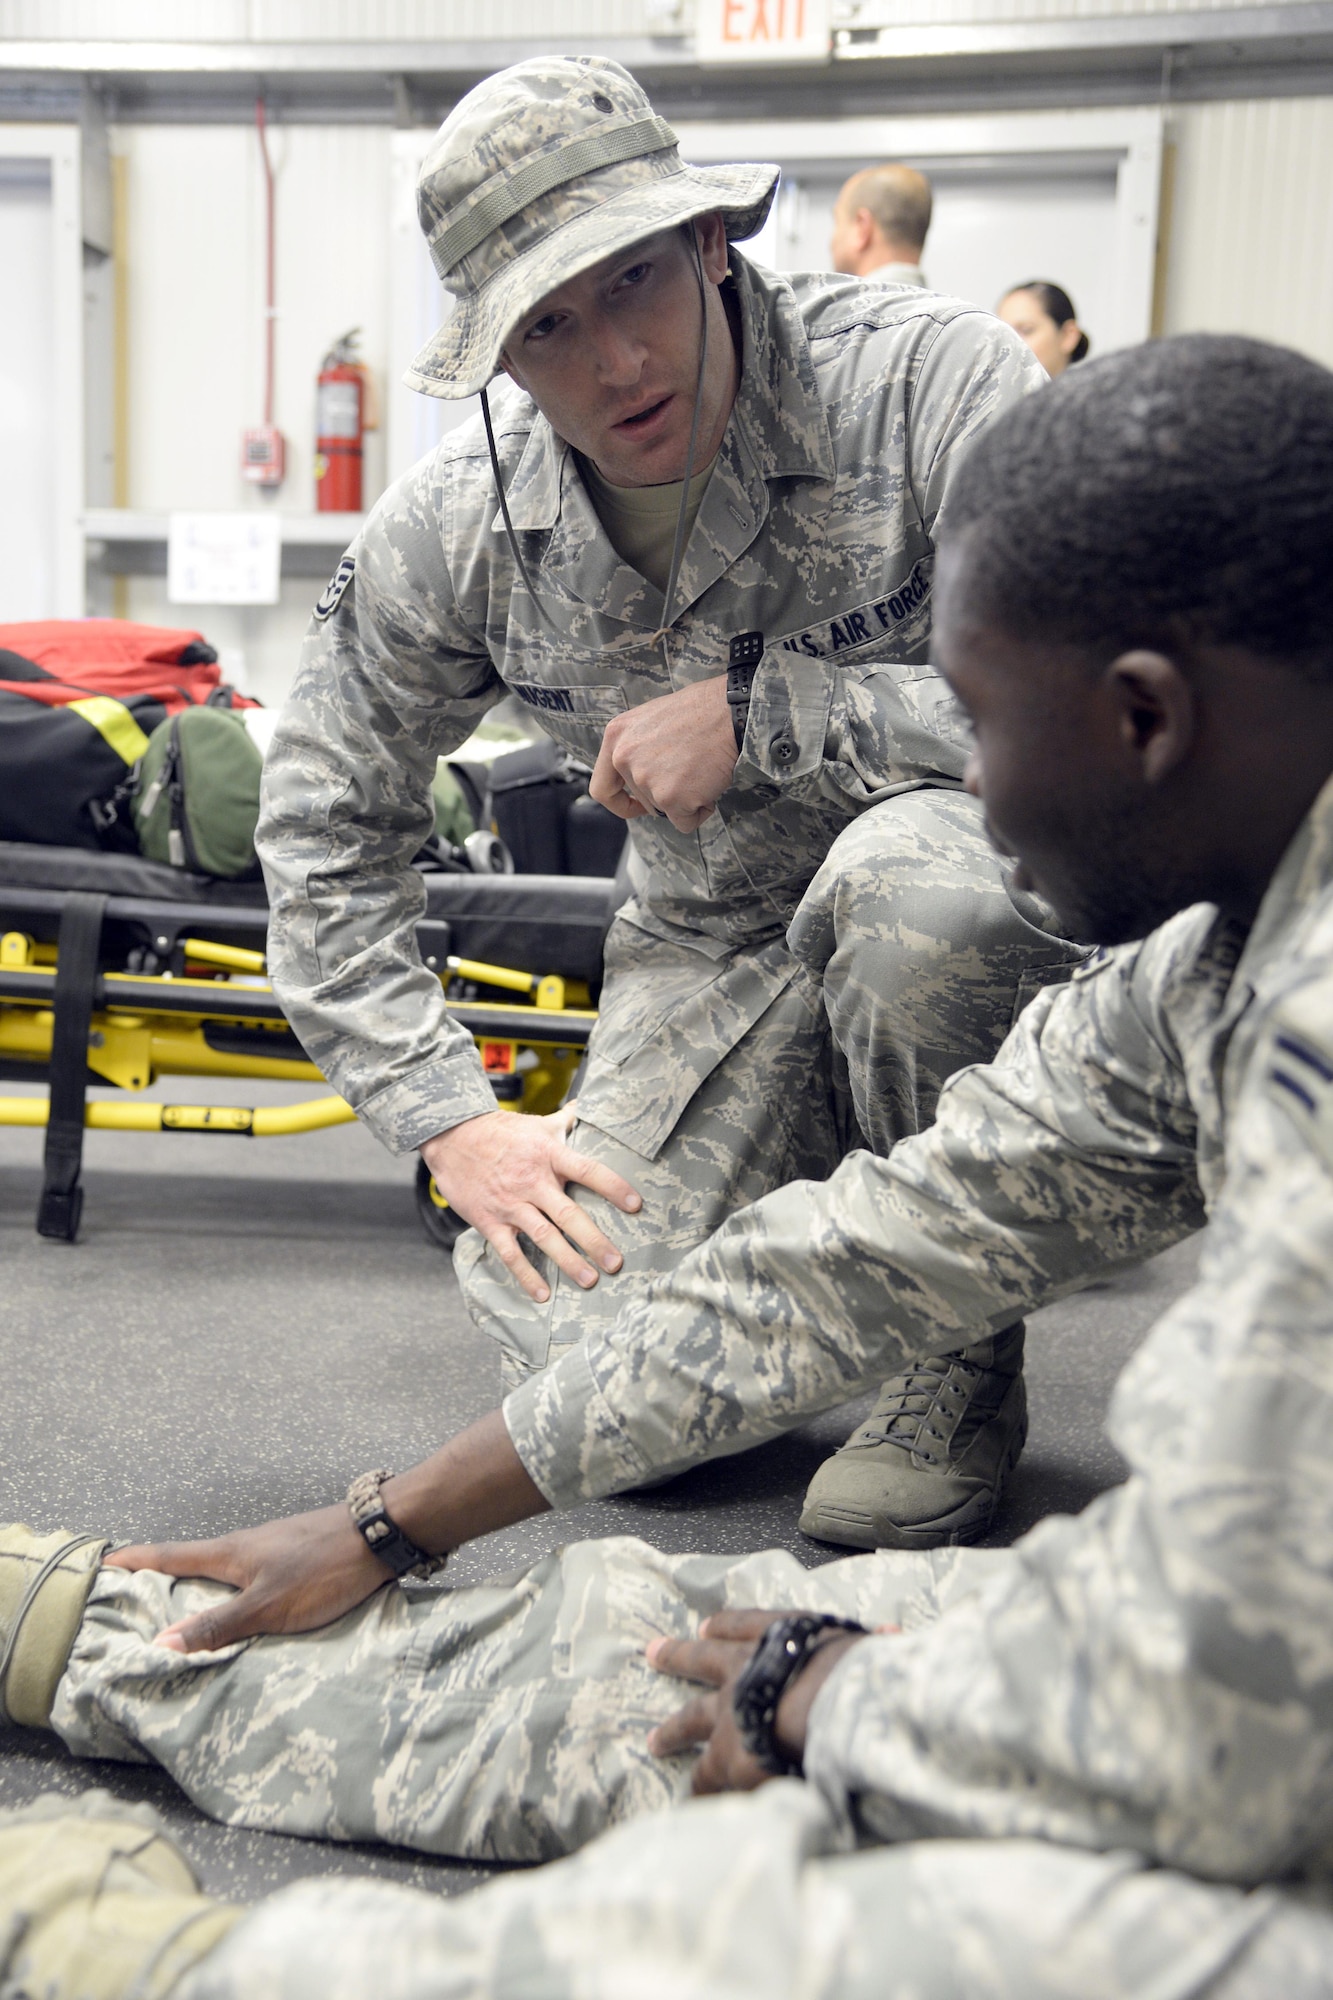 Staff Sgt. Joshua, medical technician, responds to a call for a sprained ankle during a training exercise at an undisclosed location in Southwest Asia Jan. 15, 2015. Airmen participating in the exercise were given the opportunity to receive first-hand experience as well as a learning experience on possible disease outbreaks. Joshua is currently deployed from Joint Base Langley-Eustis, Va., and is a native of Celina, Ohio. (U.S. Air Force photo/Tech. Sgt. Marie Brown)